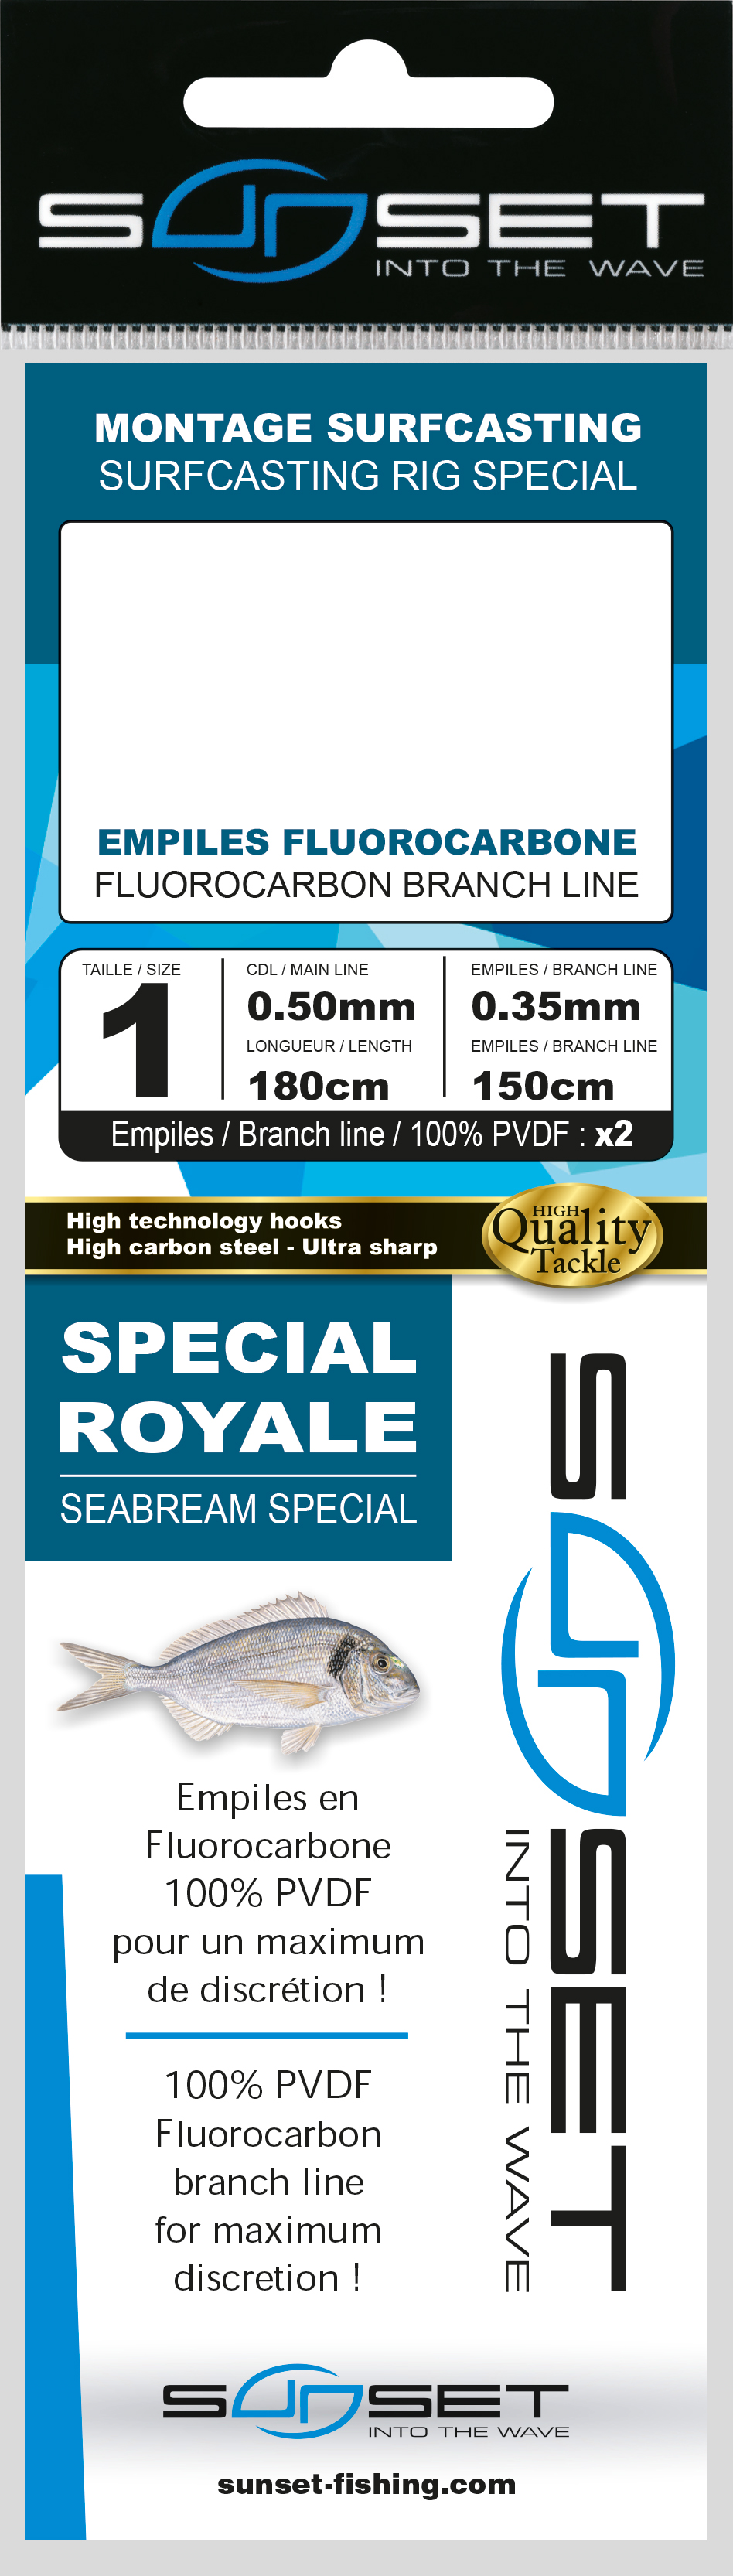 Sunset BDL Surfcasting RS Competition Special Royal Seabream Fluorocarbon Rig #1